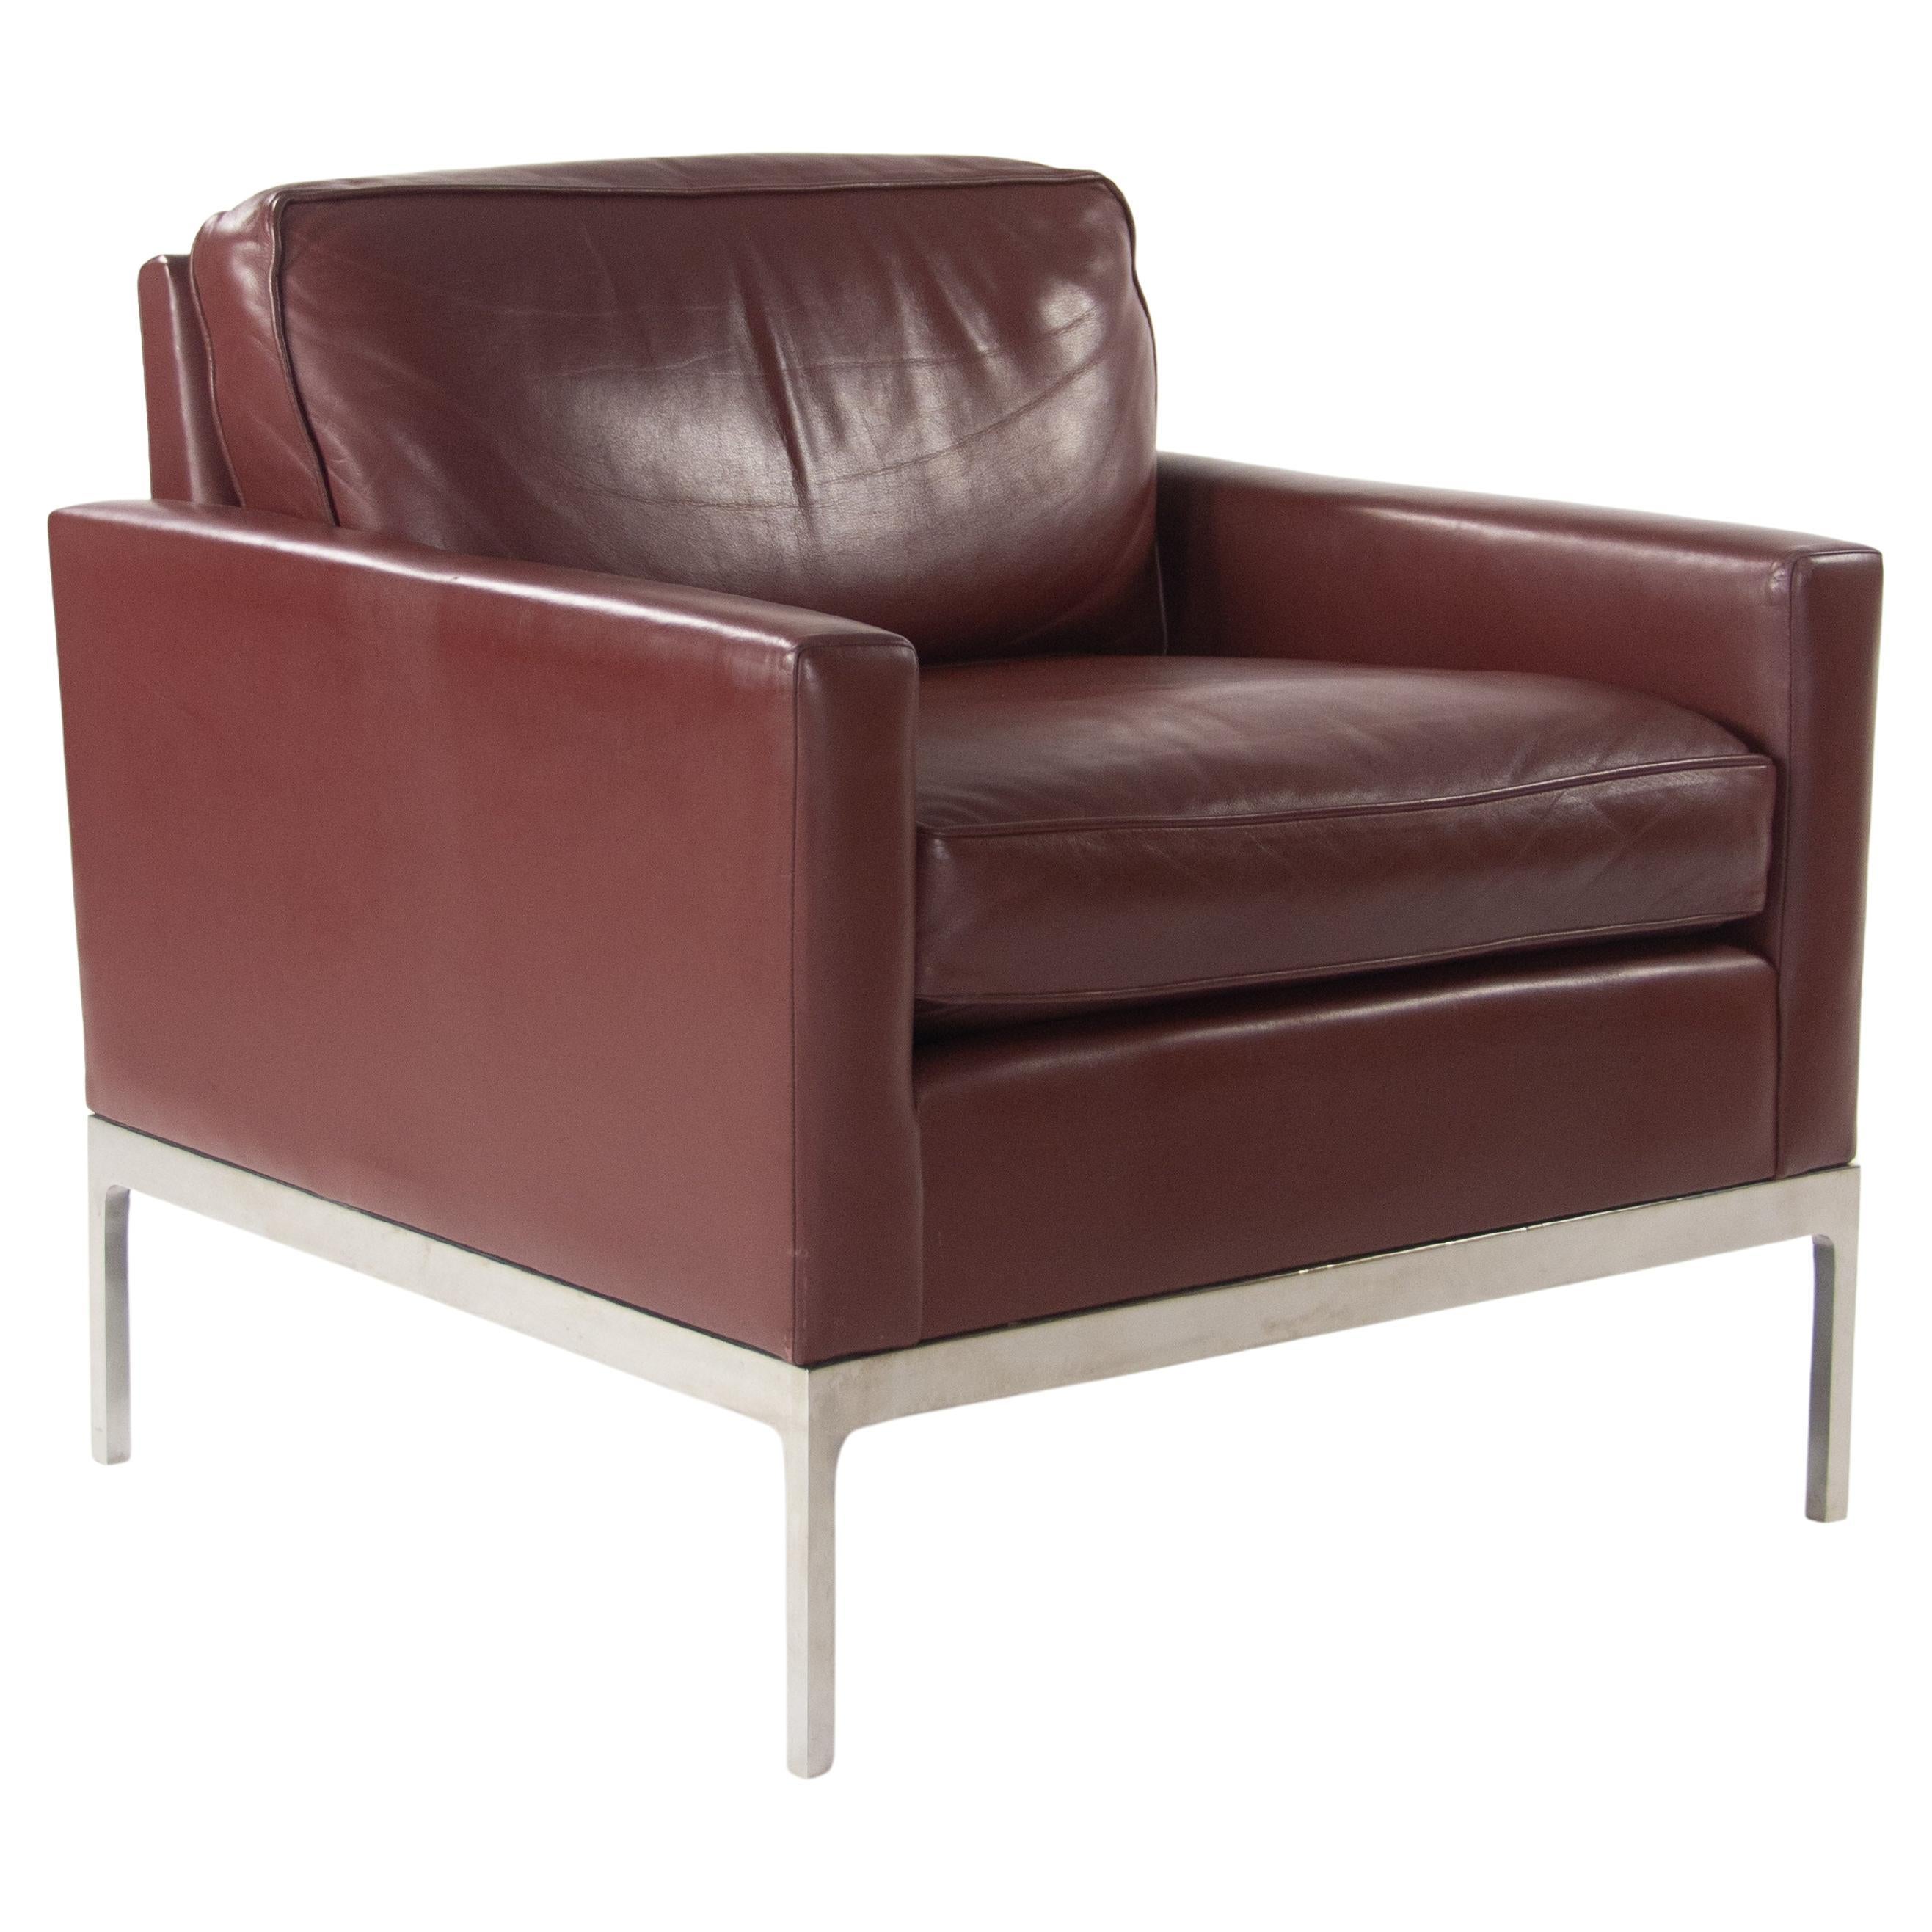 Nicos Zographos Red Leather 70 Club Chair Armchair with Polished Stainless Legs